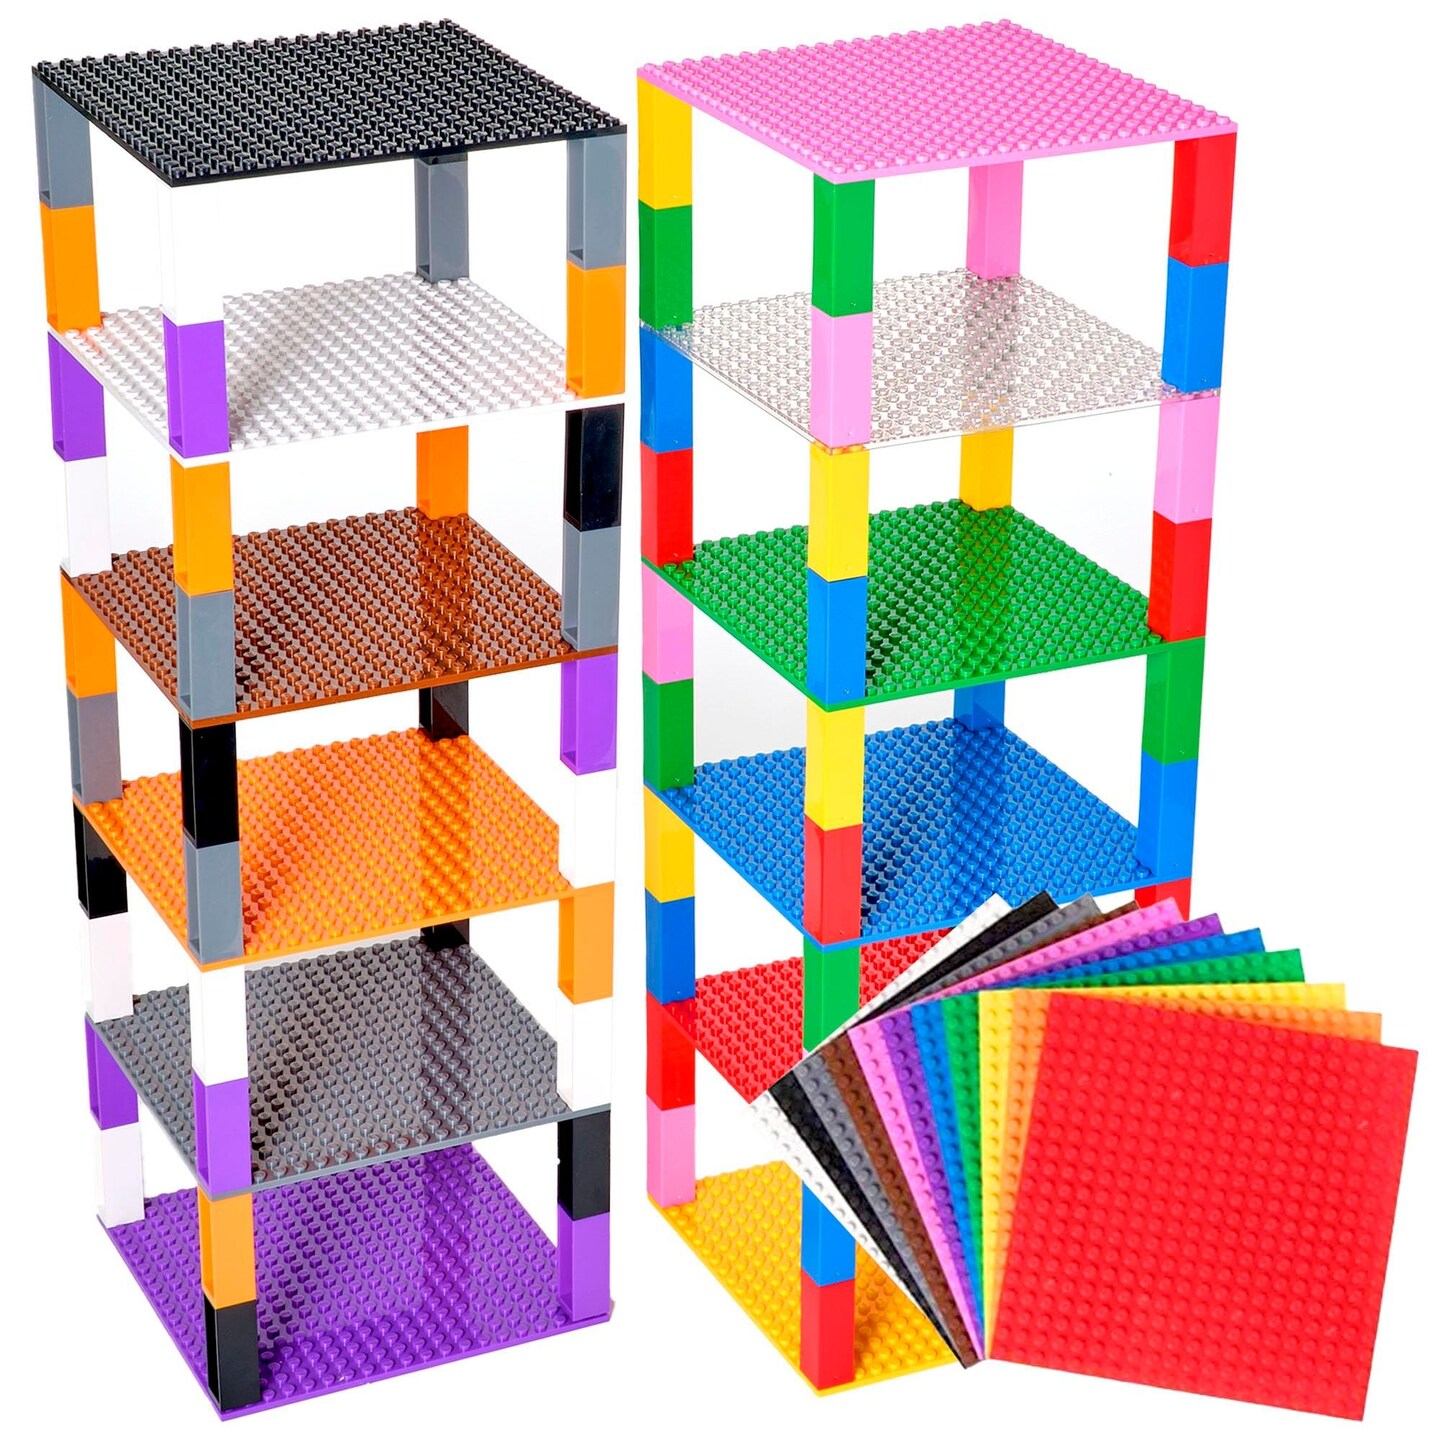 Strictly Briks Classic Stackable Baseplates, Building Bricks For Towers, Shelves, and More, 100% Compatible with All Major Brands, Rainbow Colors, 12 Base Plates &#x26; 80 Stackers, 6x6 Inches